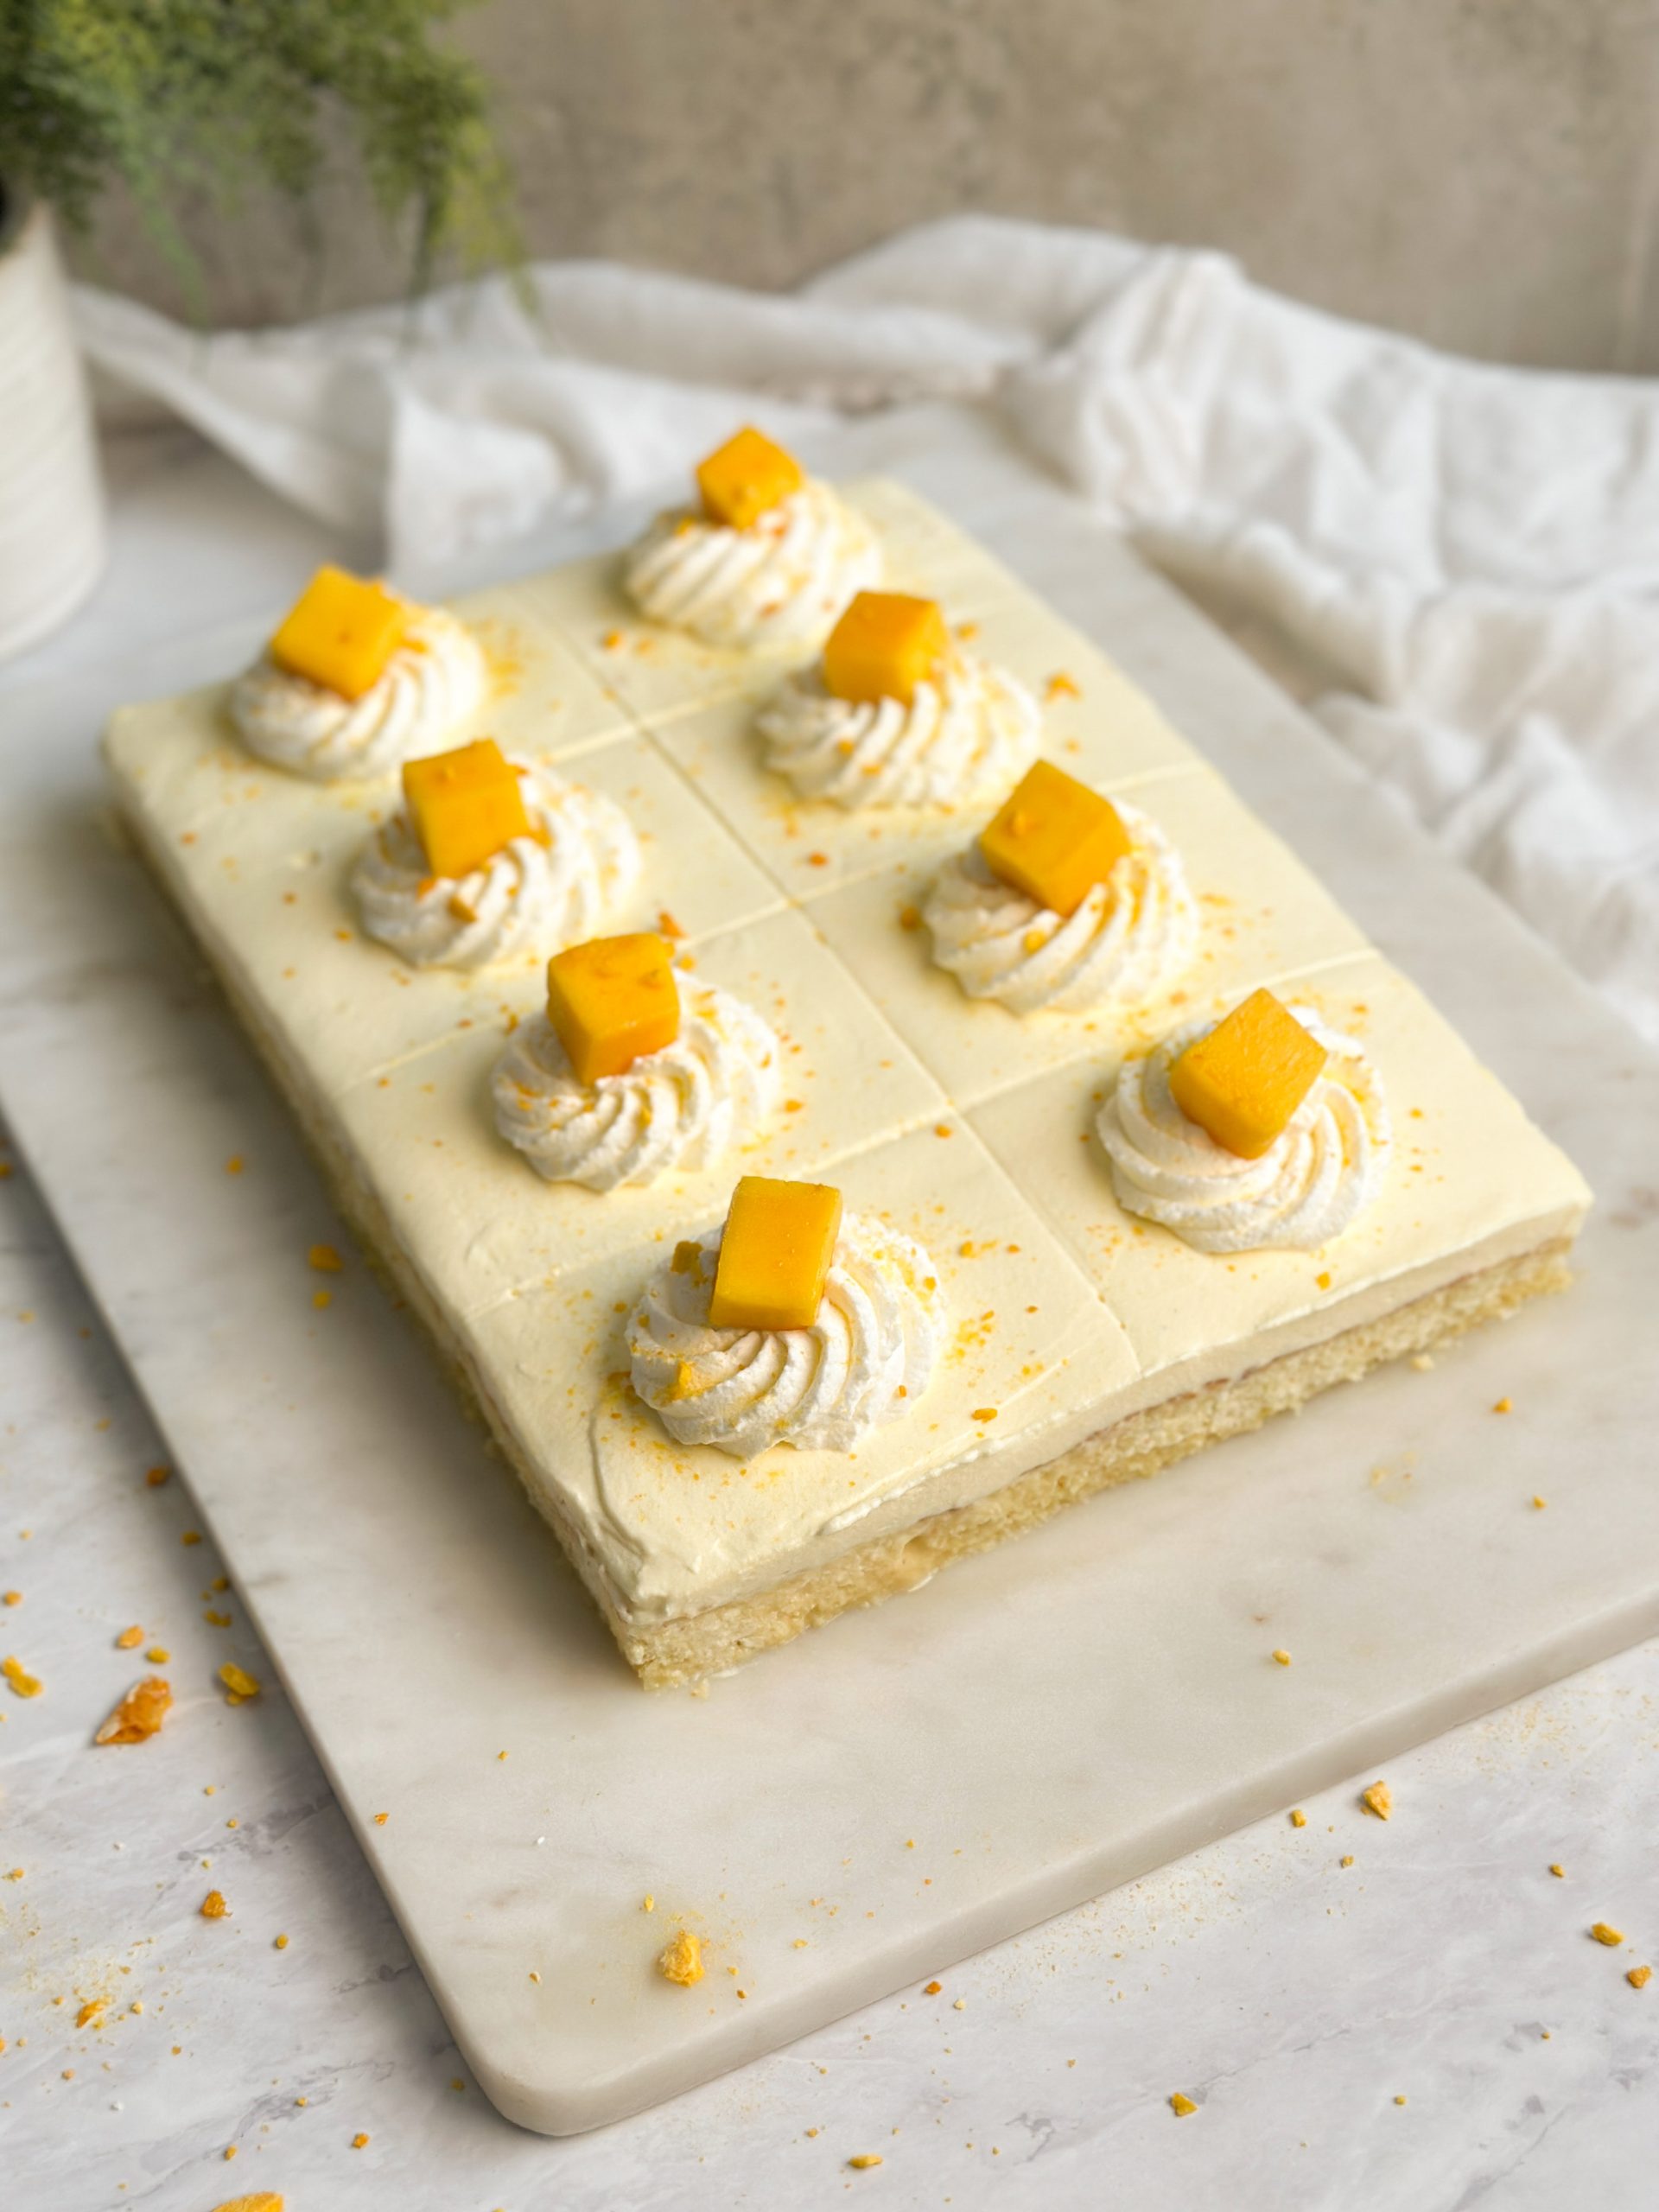 A sheet of mango lassi tres leches cake decorated with mango whipped cream, whipped cream rosettes and mango cubes